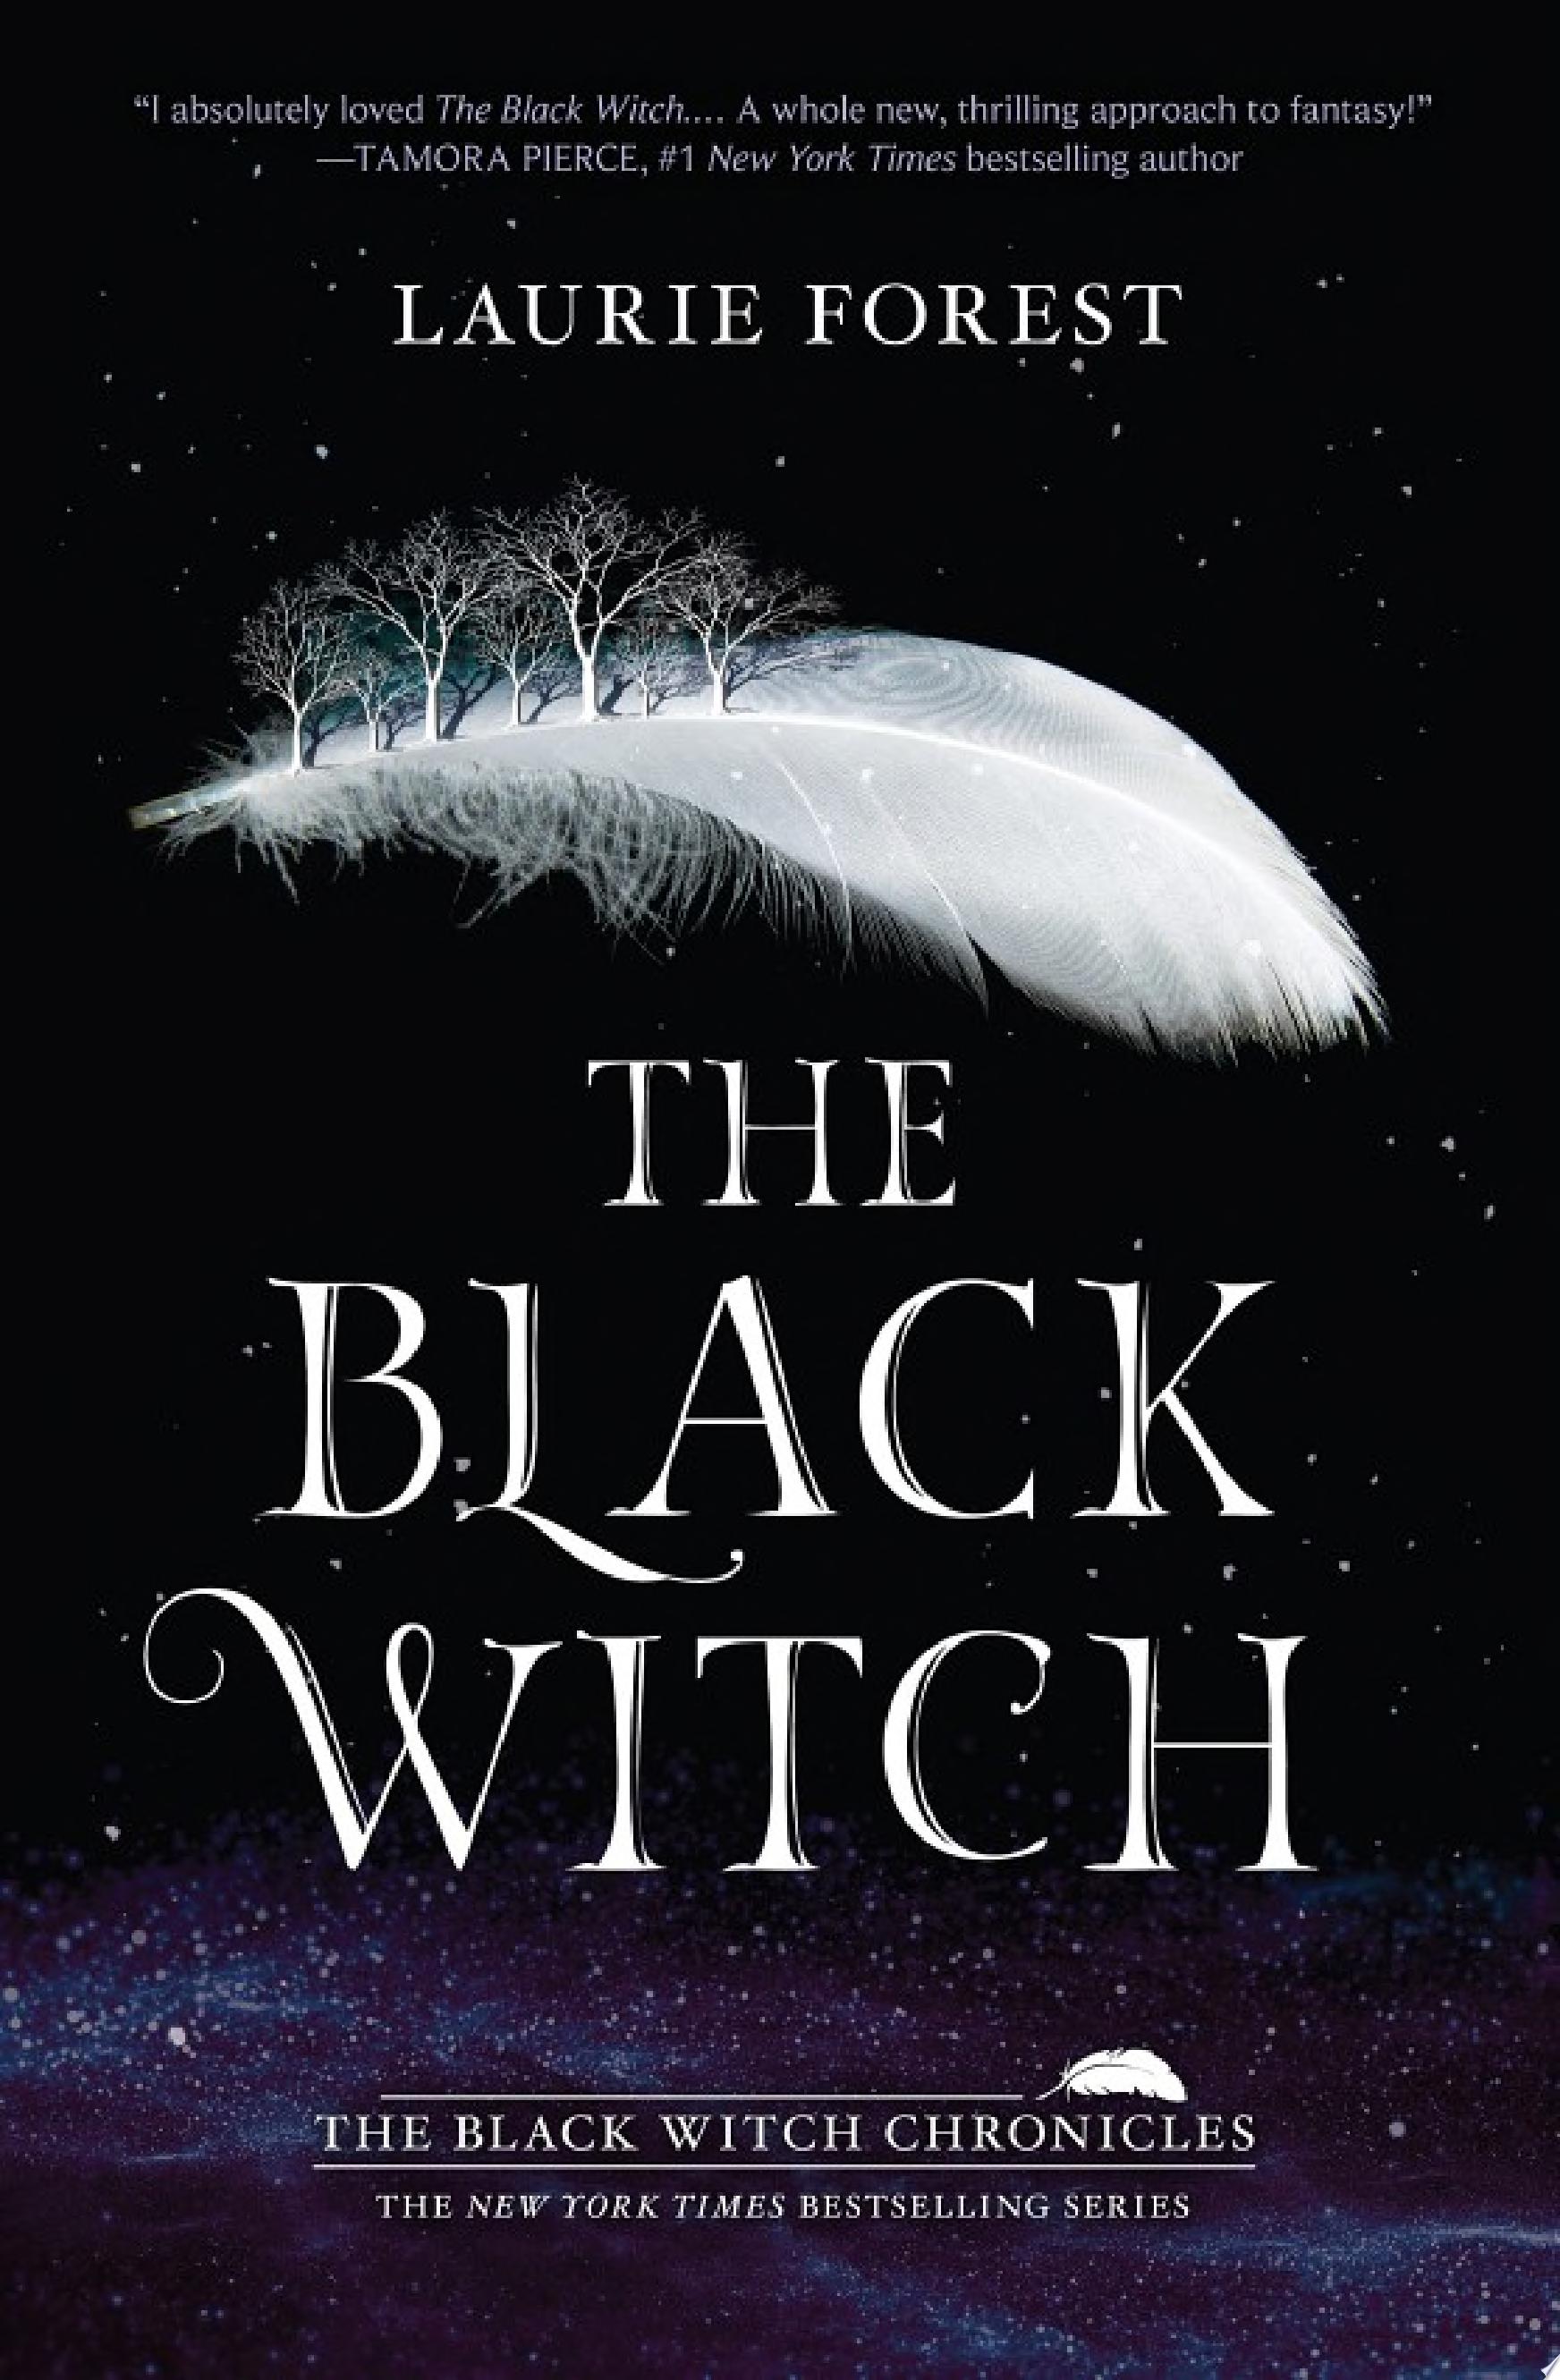 Image for "The Black Witch"